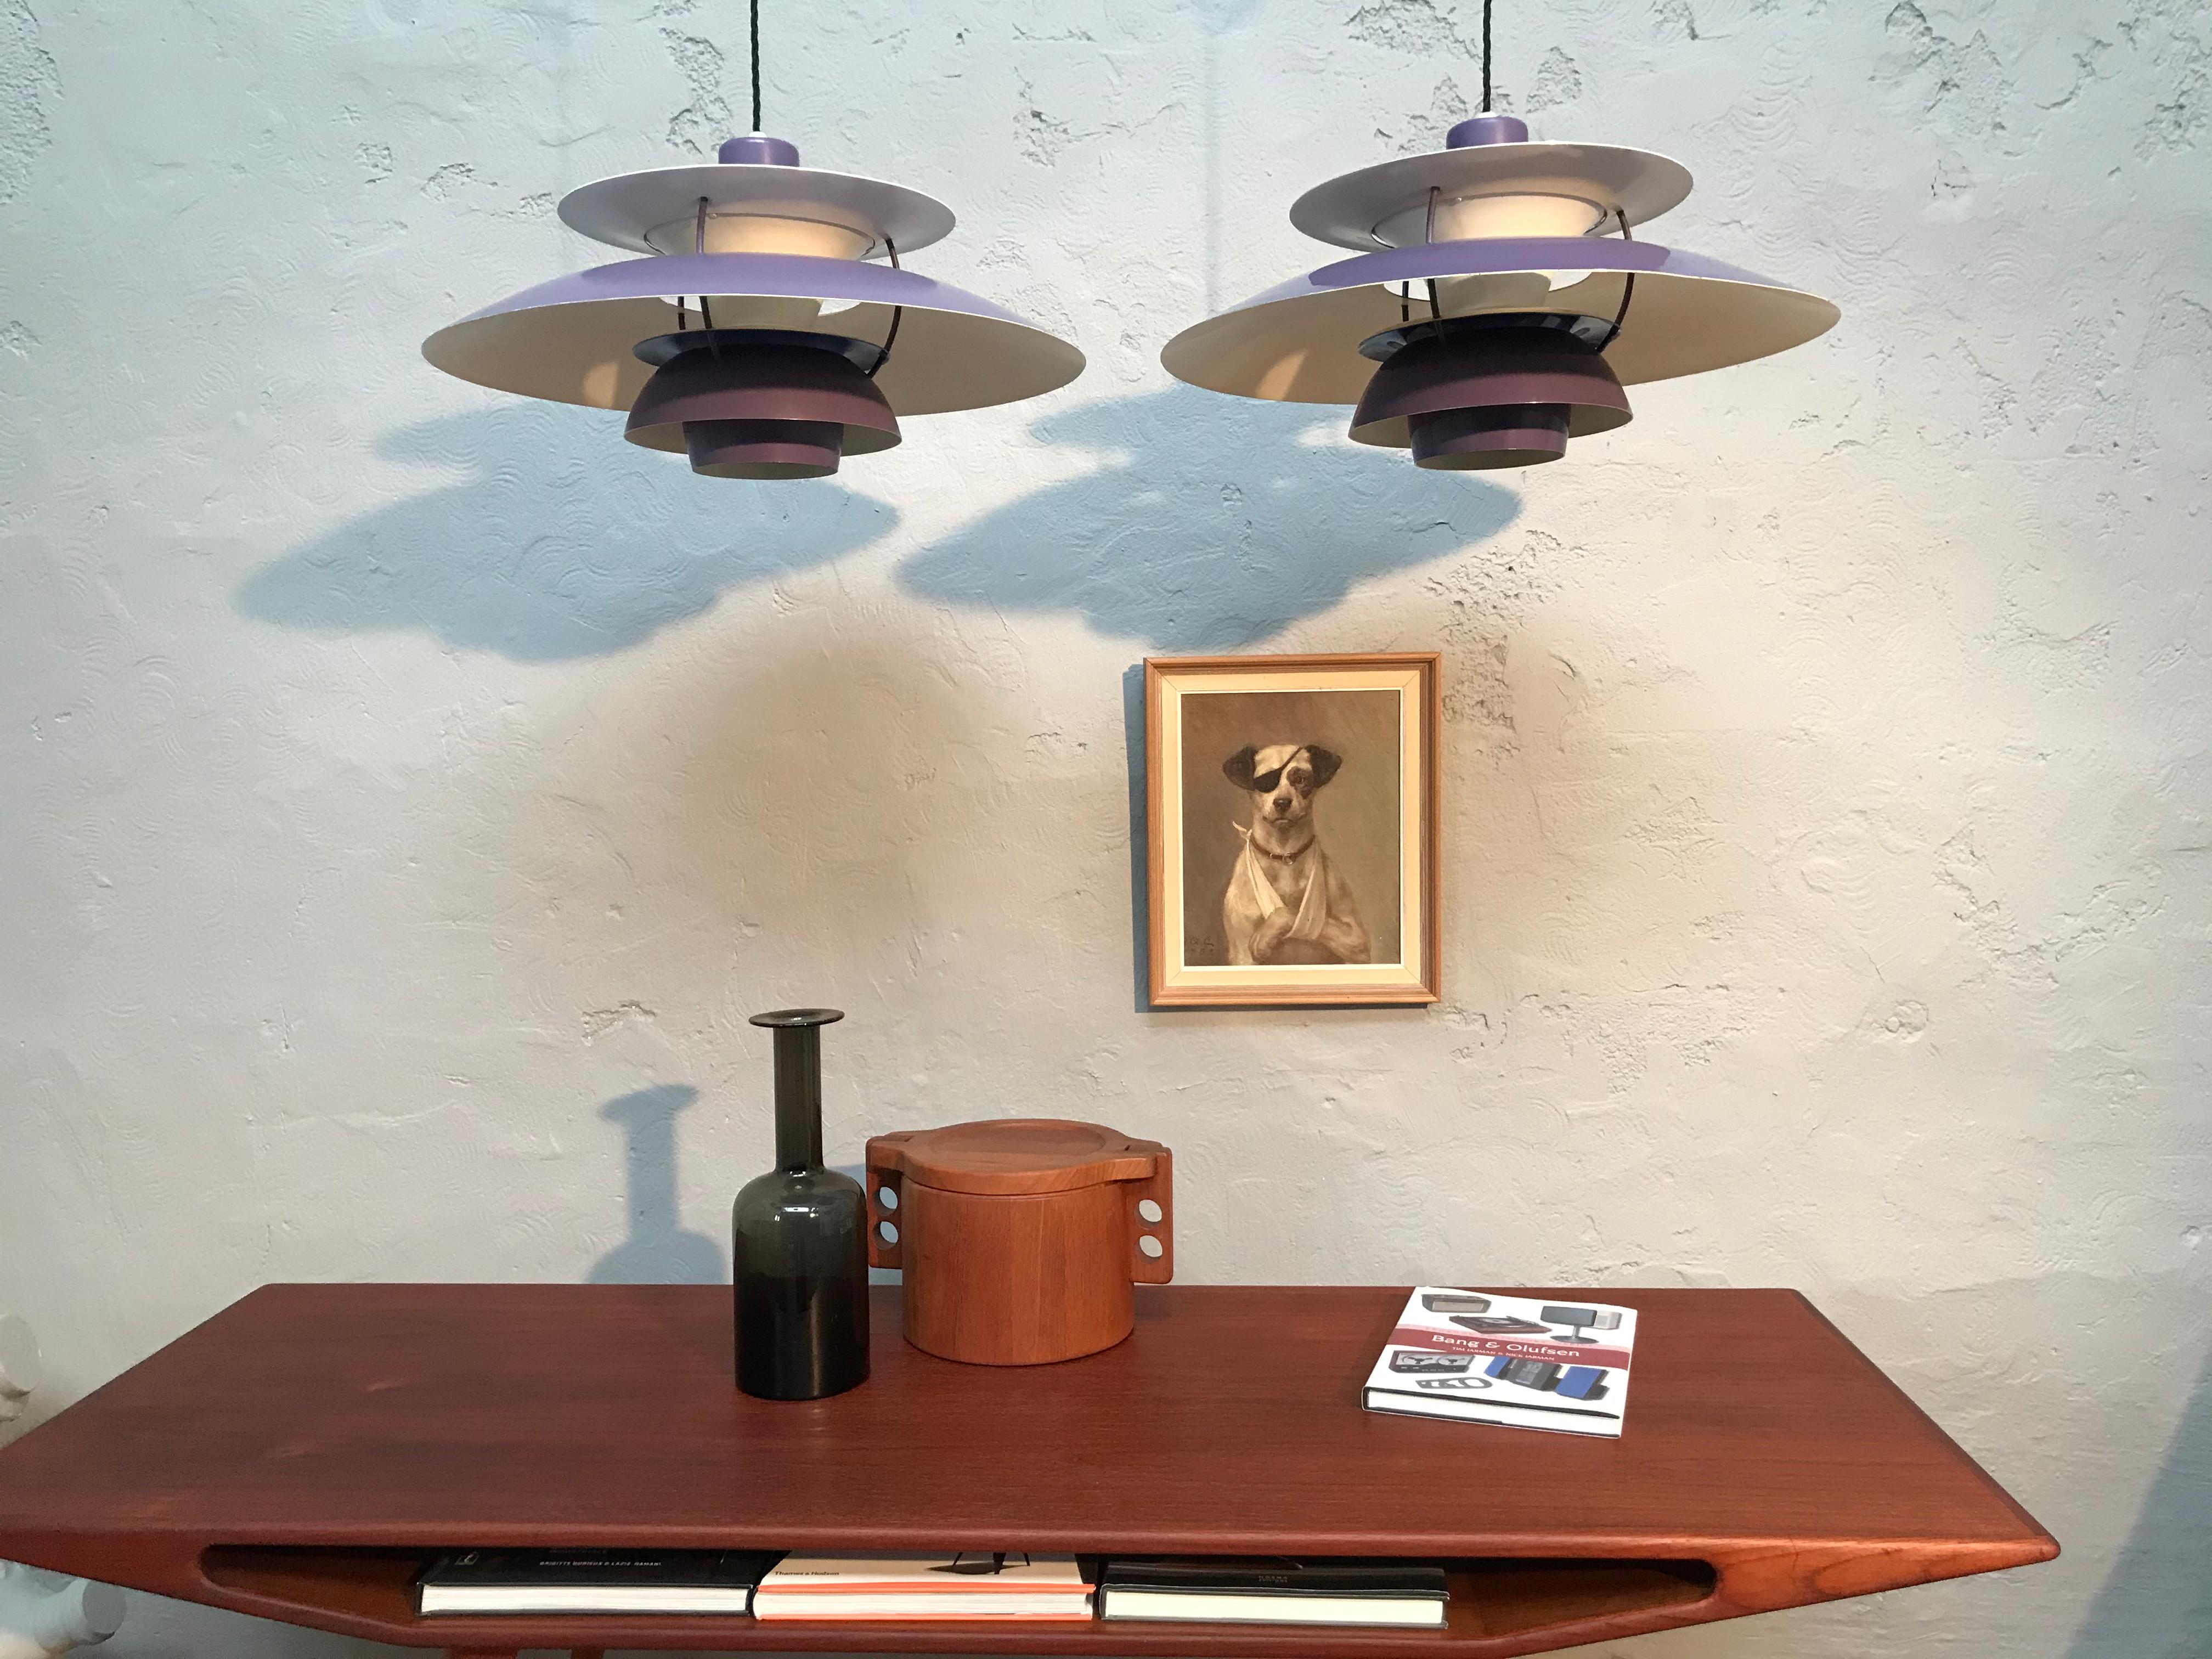 Rare Iconic vintage PH 5 chandelier pendant lamps from 1959.
Second Edition.
Poul Henningsen designed this iconic lamp in 1958 and in September of the same year they were presented to the public at Illums Bolighus.
And we are presenting here an